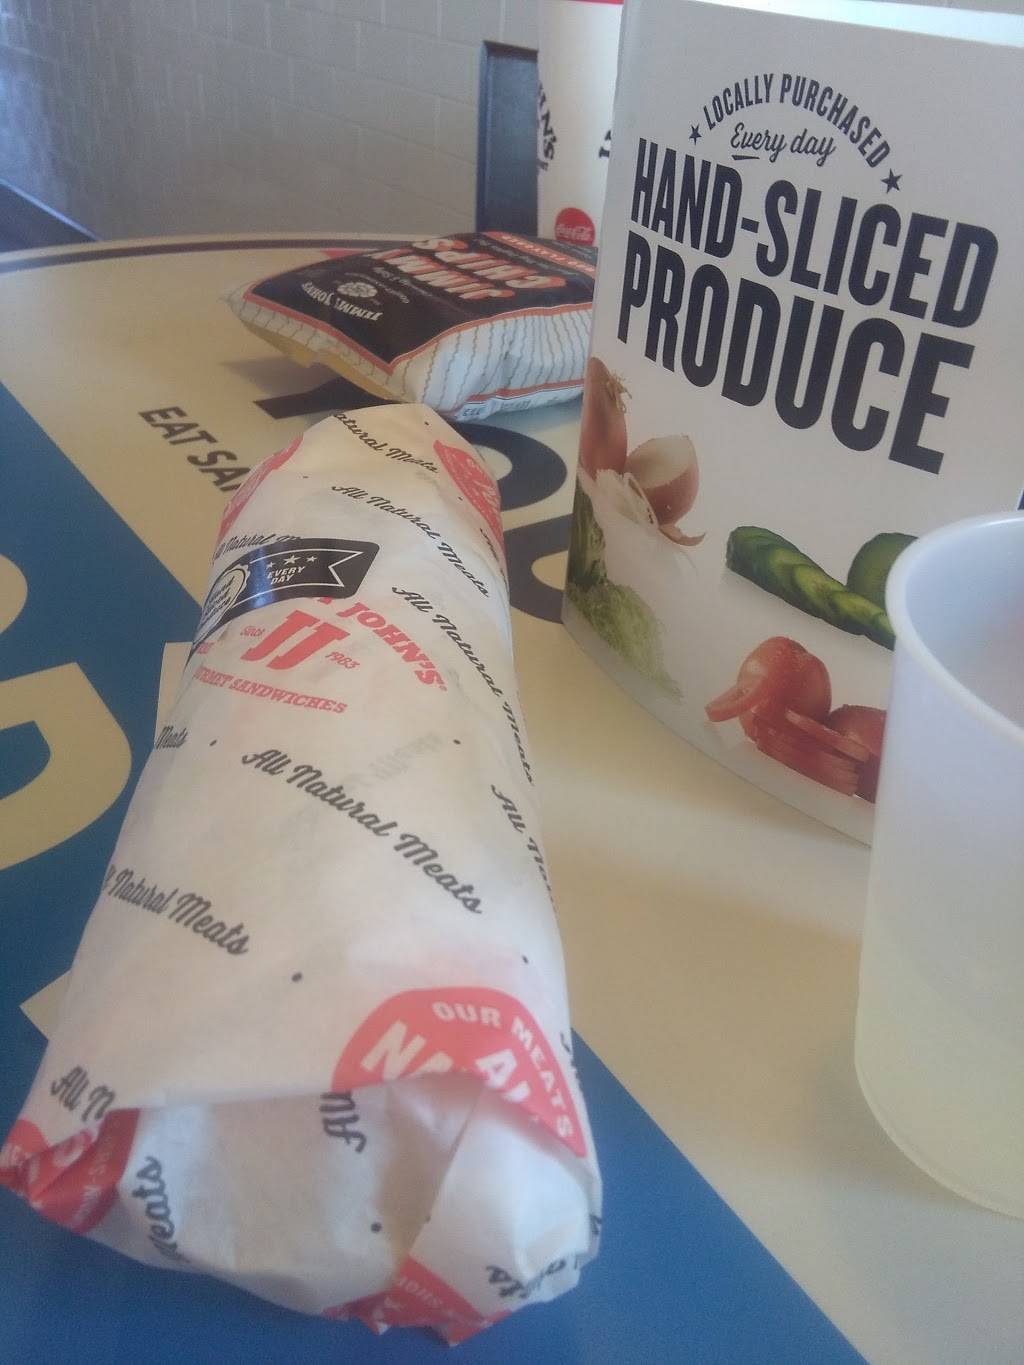 Jimmy Johns | meal delivery | 1417 Stamer Dr, Litchfield, IL 62056, USA | 2173243333 OR +1 217-324-3333